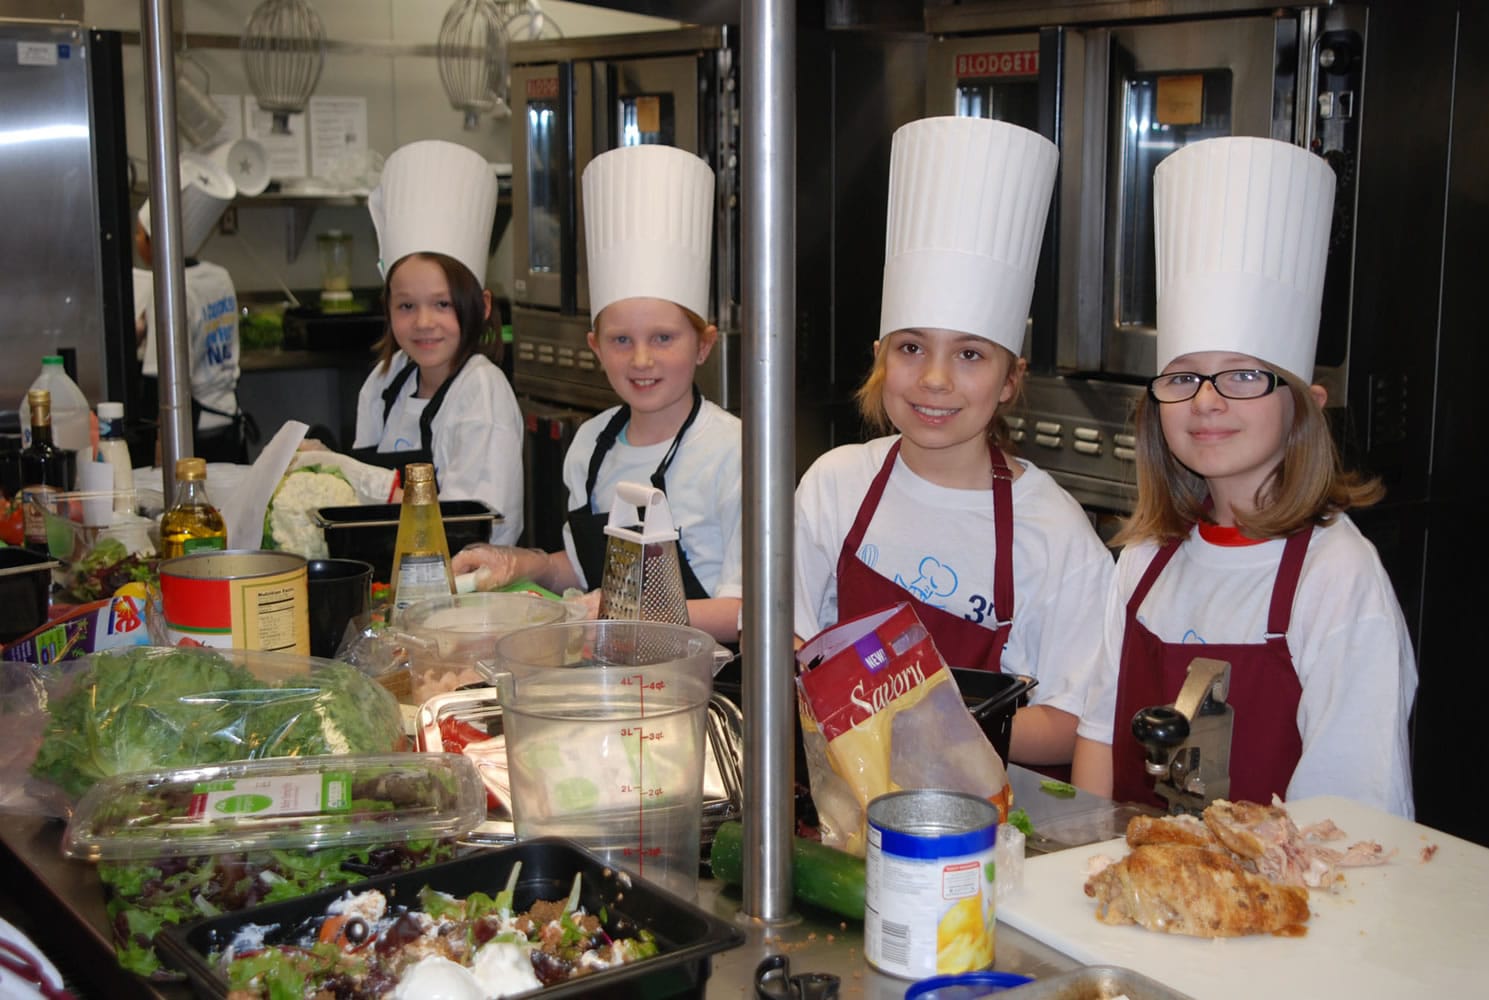 Washougal: Elementary school students in Washougal create healthful entrees during the third-annual Sodexo Future Chefs Elementary School Culinary Competition on March 20.